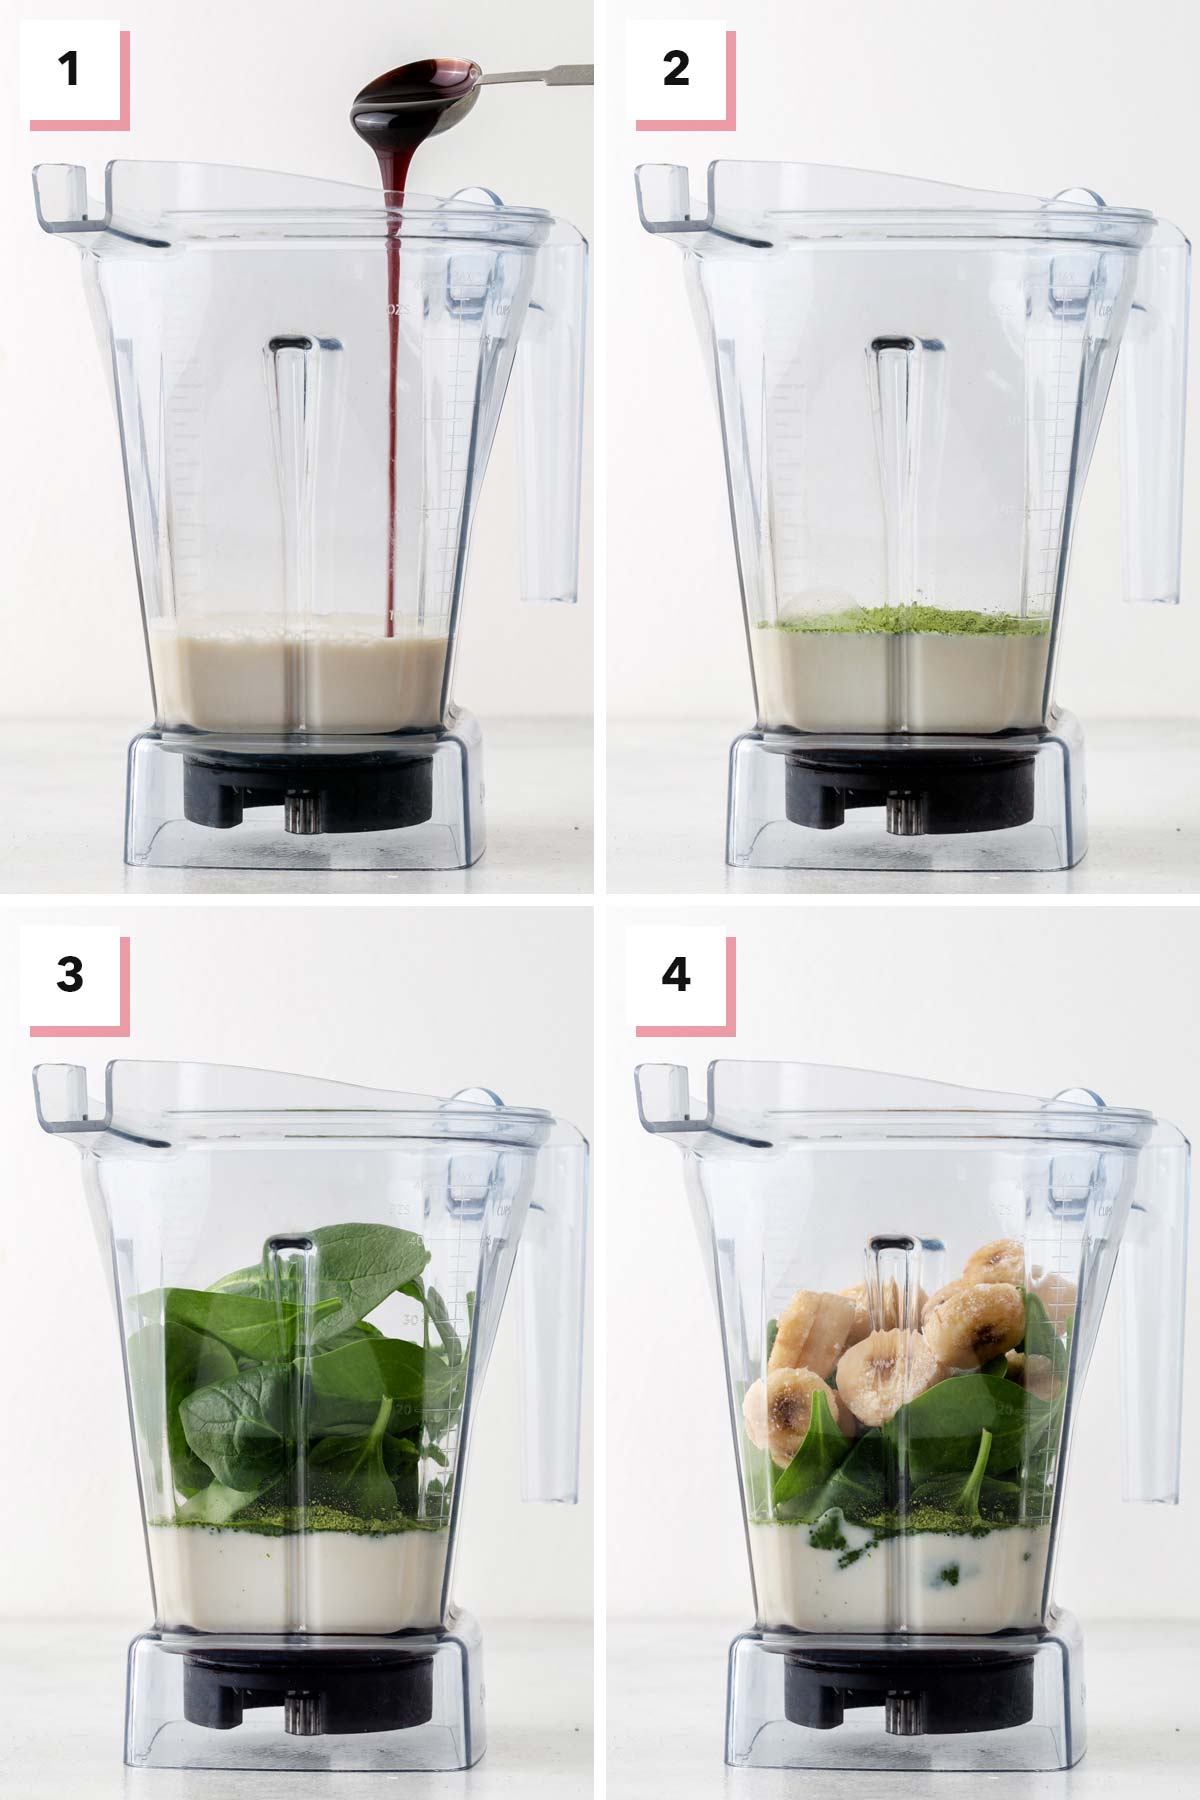 Step-by-step instructions for making a matcha smooothie.